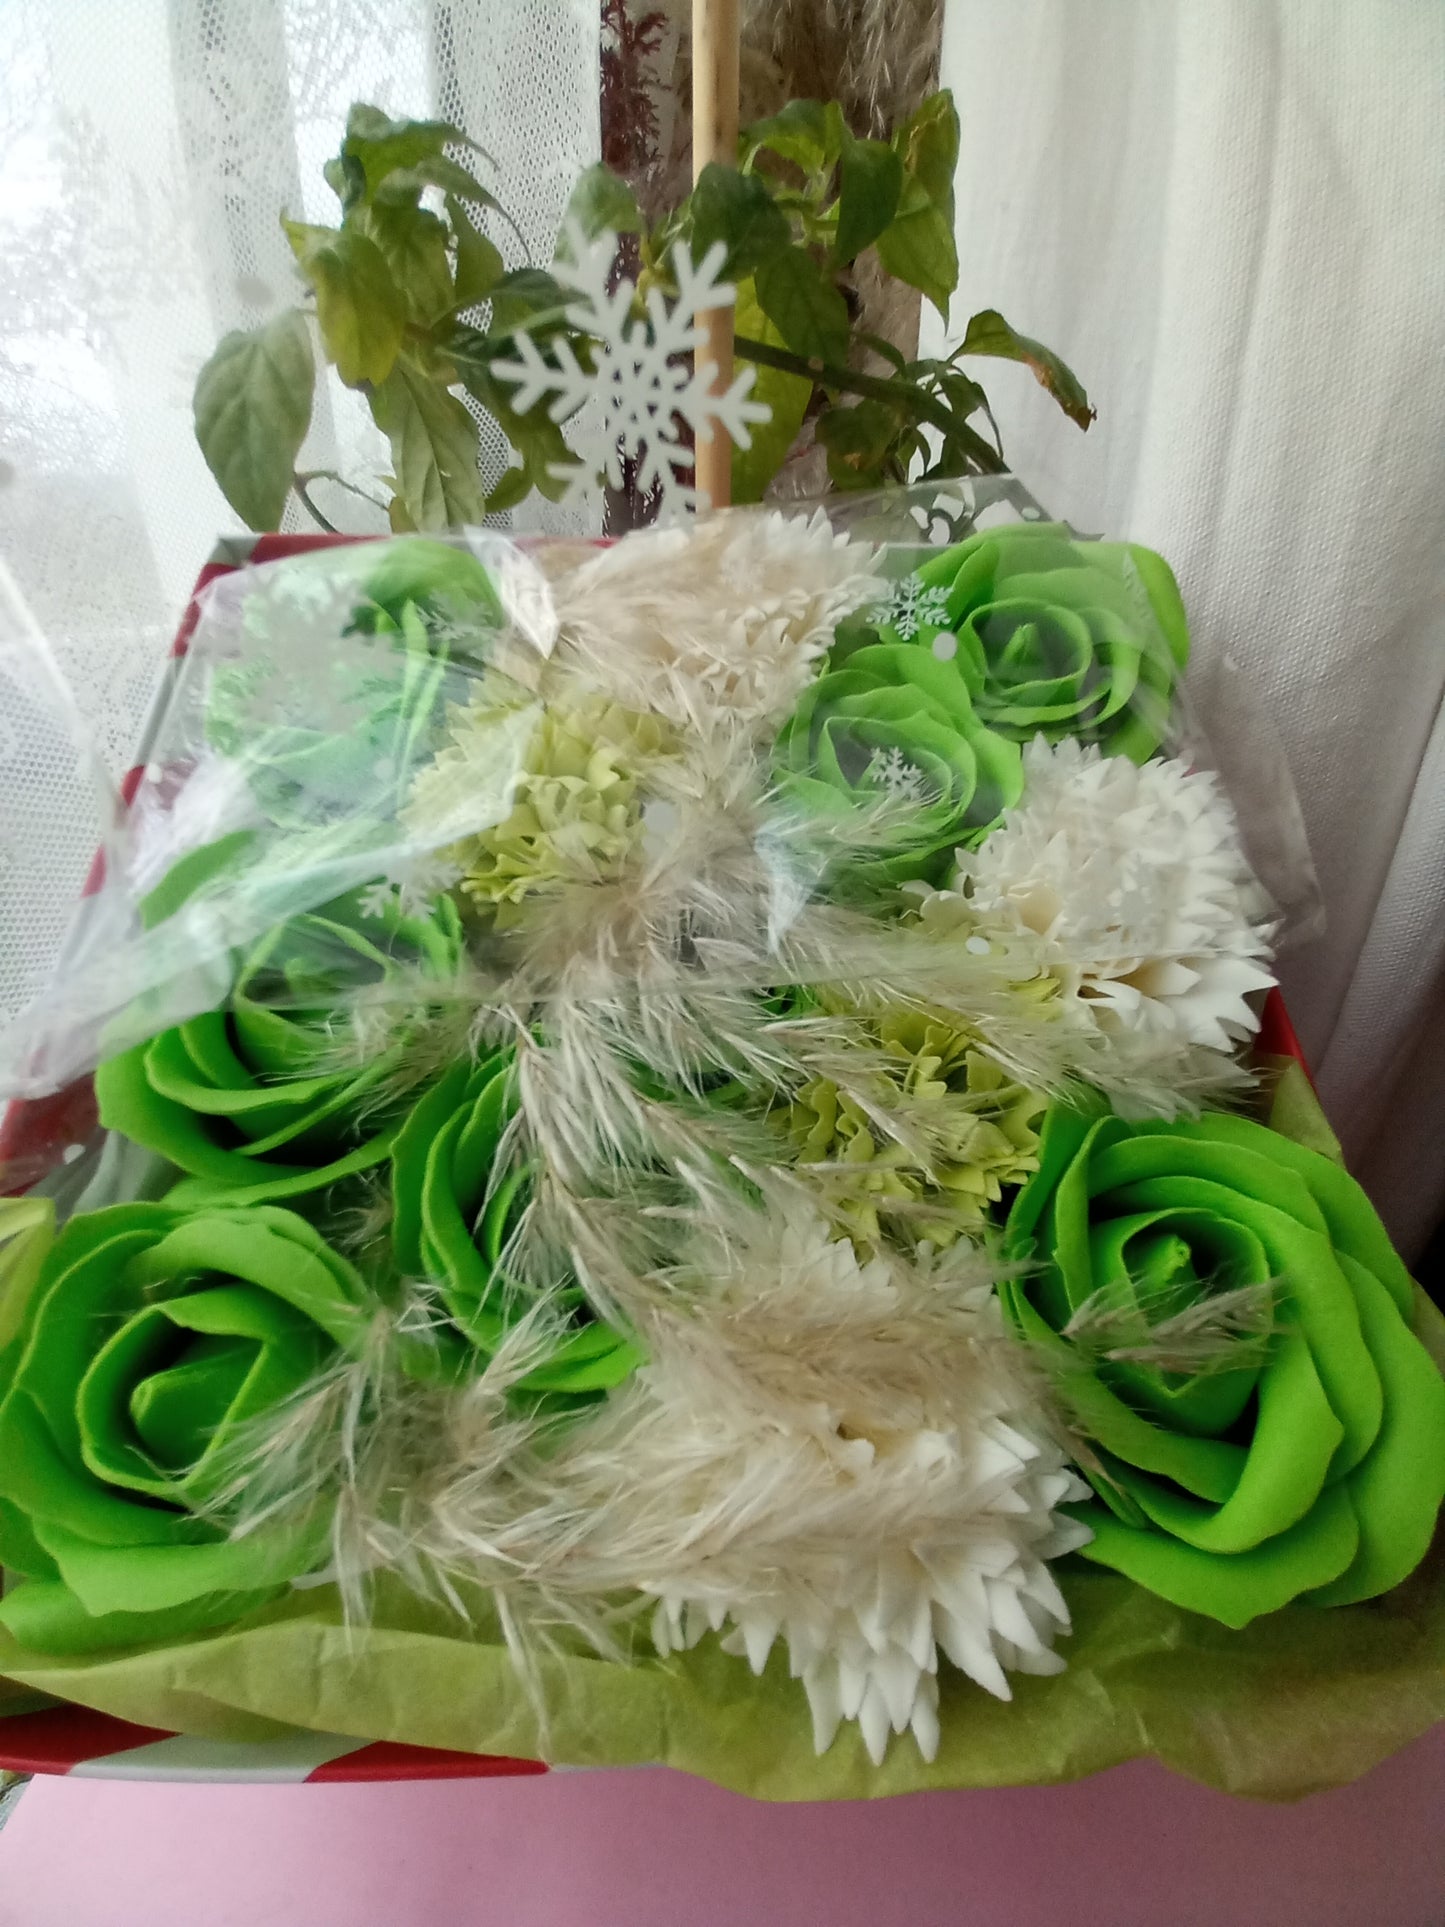 GREEN ON GREEN AND WHITE FLOWER SOAP IN CANDY CANE DISPLAY BOX